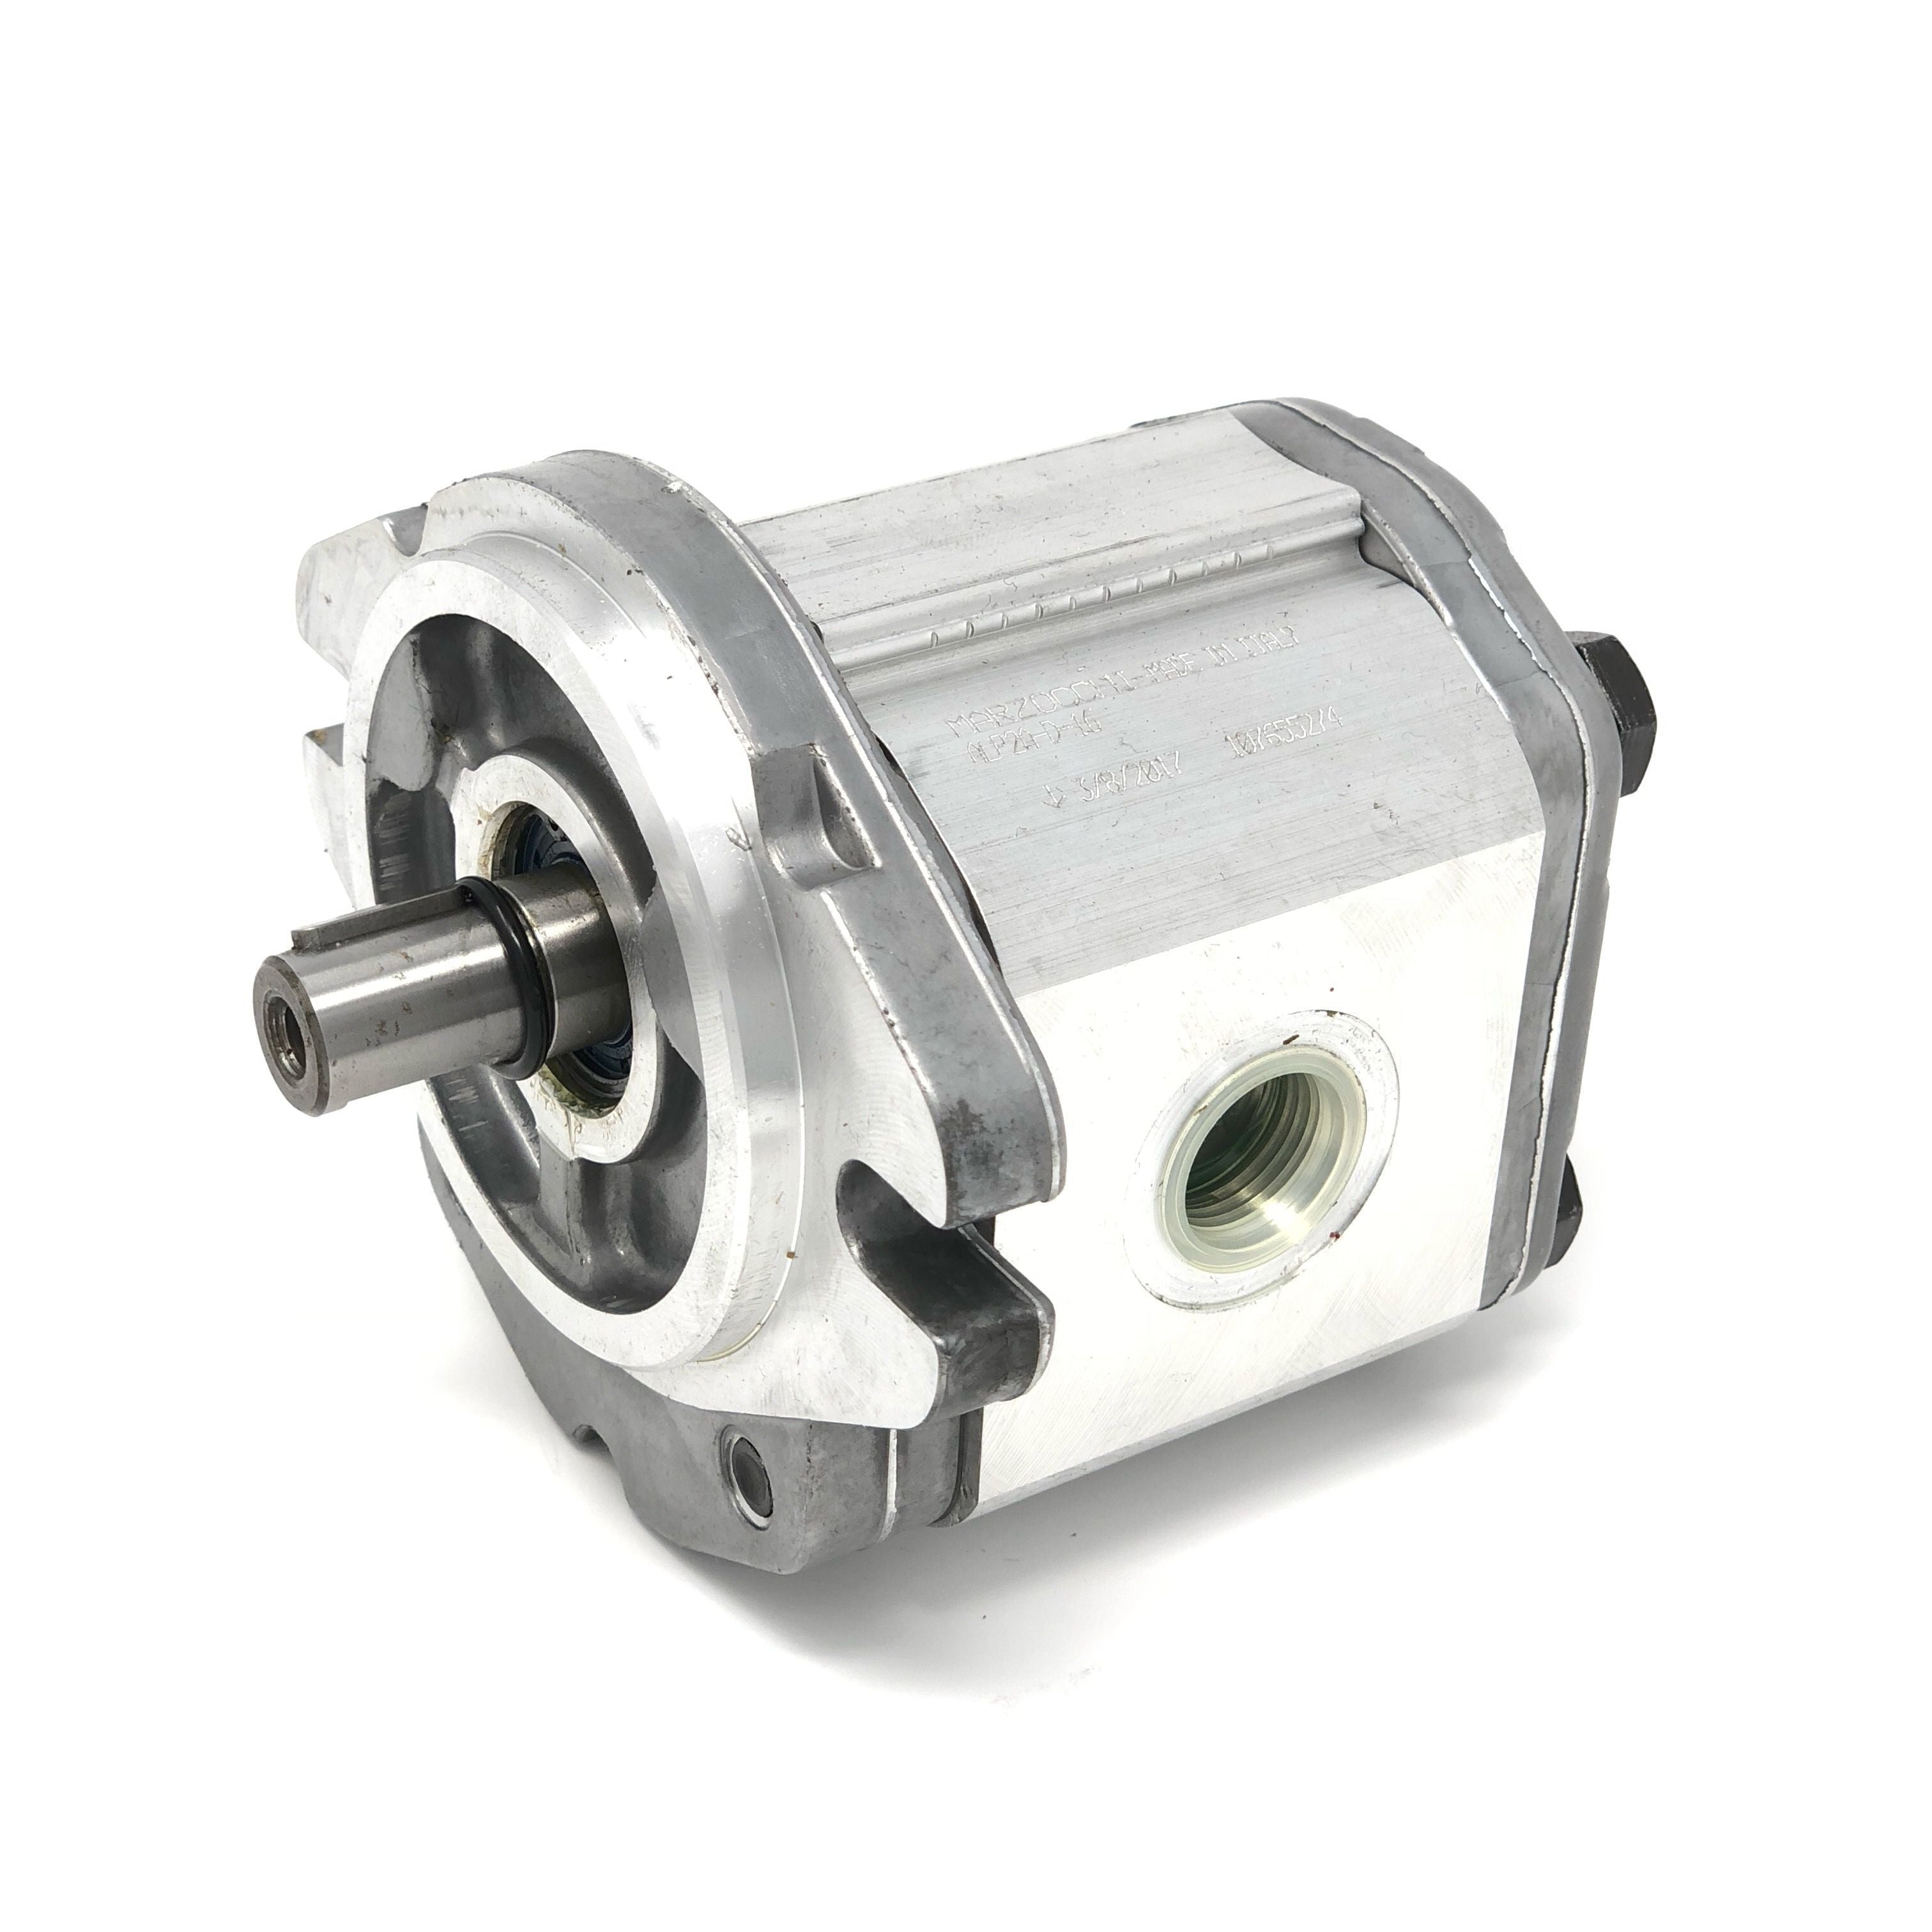 ALP1A-D-6 : Marzocchi Gear Pump, CW, 4.1cc (0.2501in3), 1.95 GPM, 3625psi, 4000 RPM, #8 SAE (1/2") In, #6 SAE (3/8") Out, Keyed Shaft 1/2" Bore x 1/8" Key, SAE AA 2-Bolt Mount